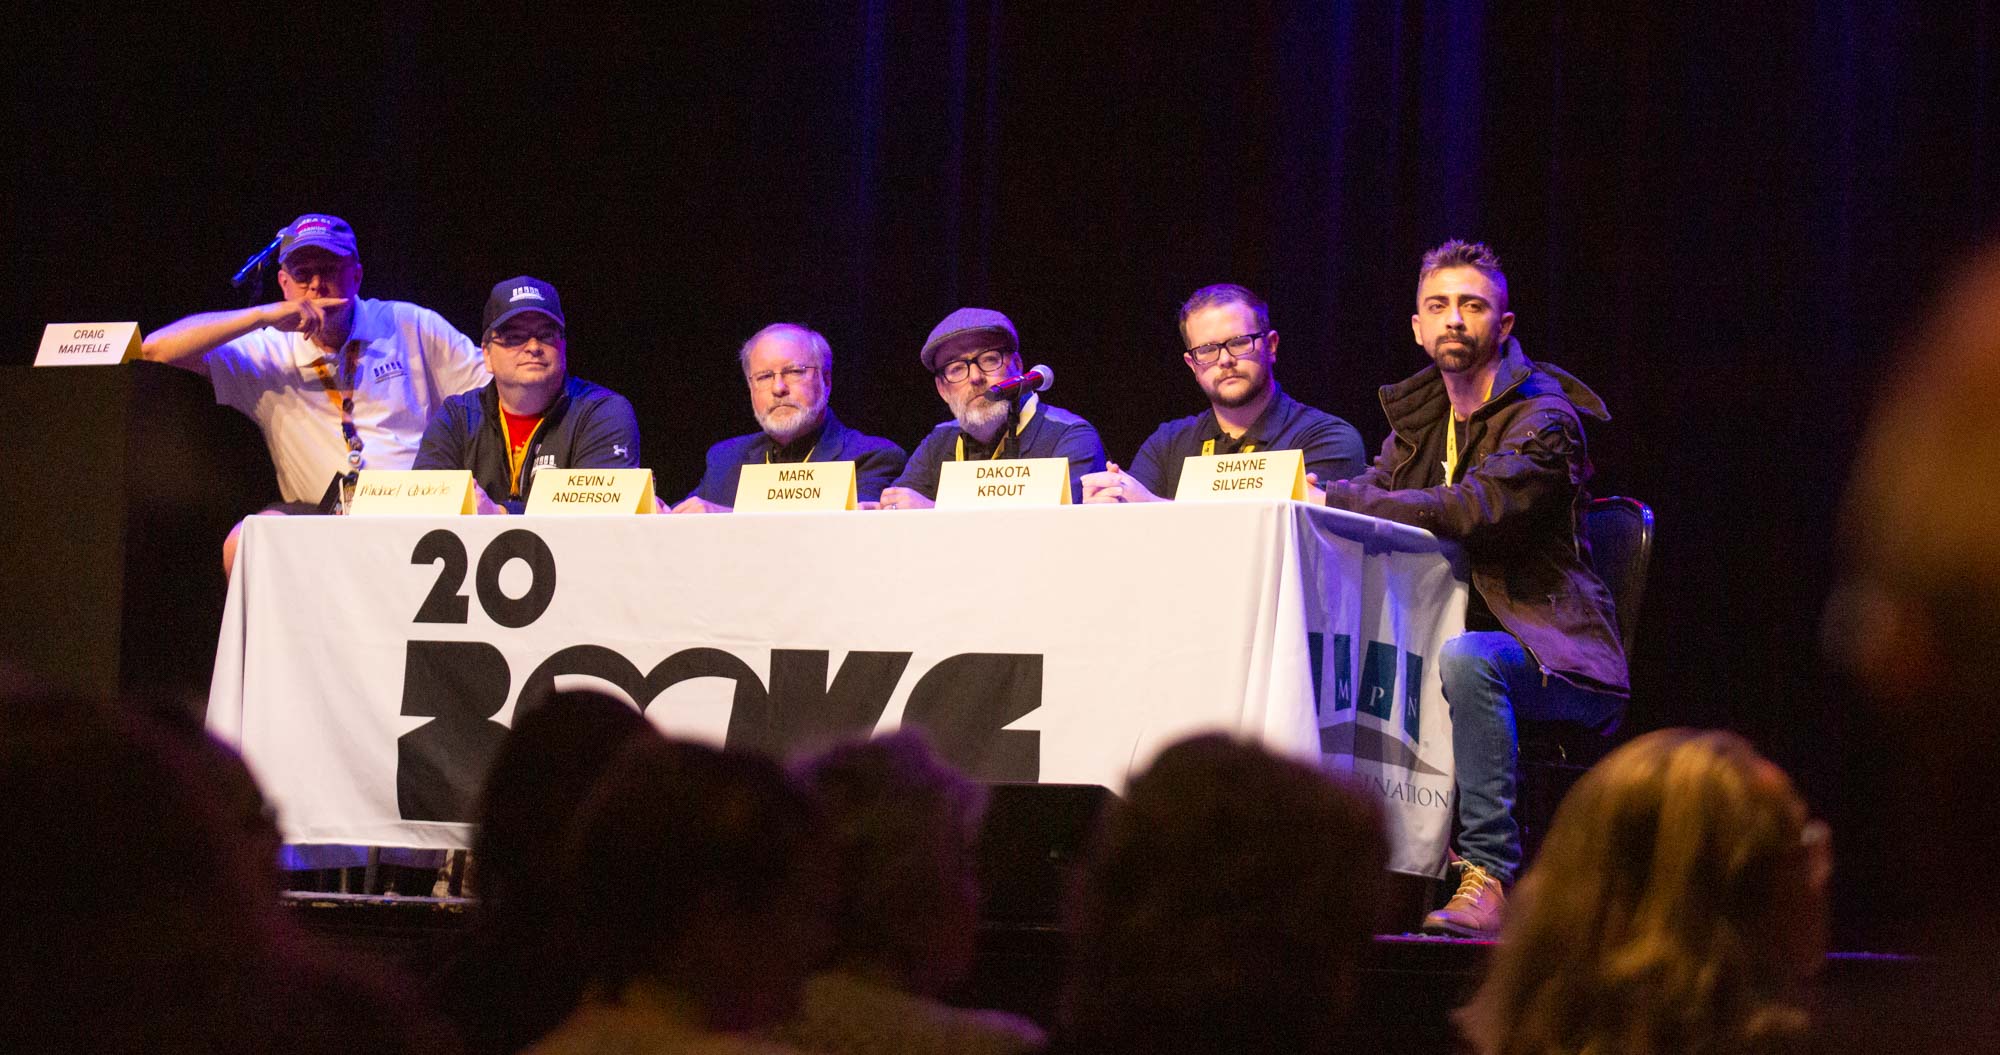 Craig Martelle, Michael Anderle, Kevin J. Anderson, Mark Dawson, Dakota Krout and Shayne Silvers during the final panel at 20Books Vegas.